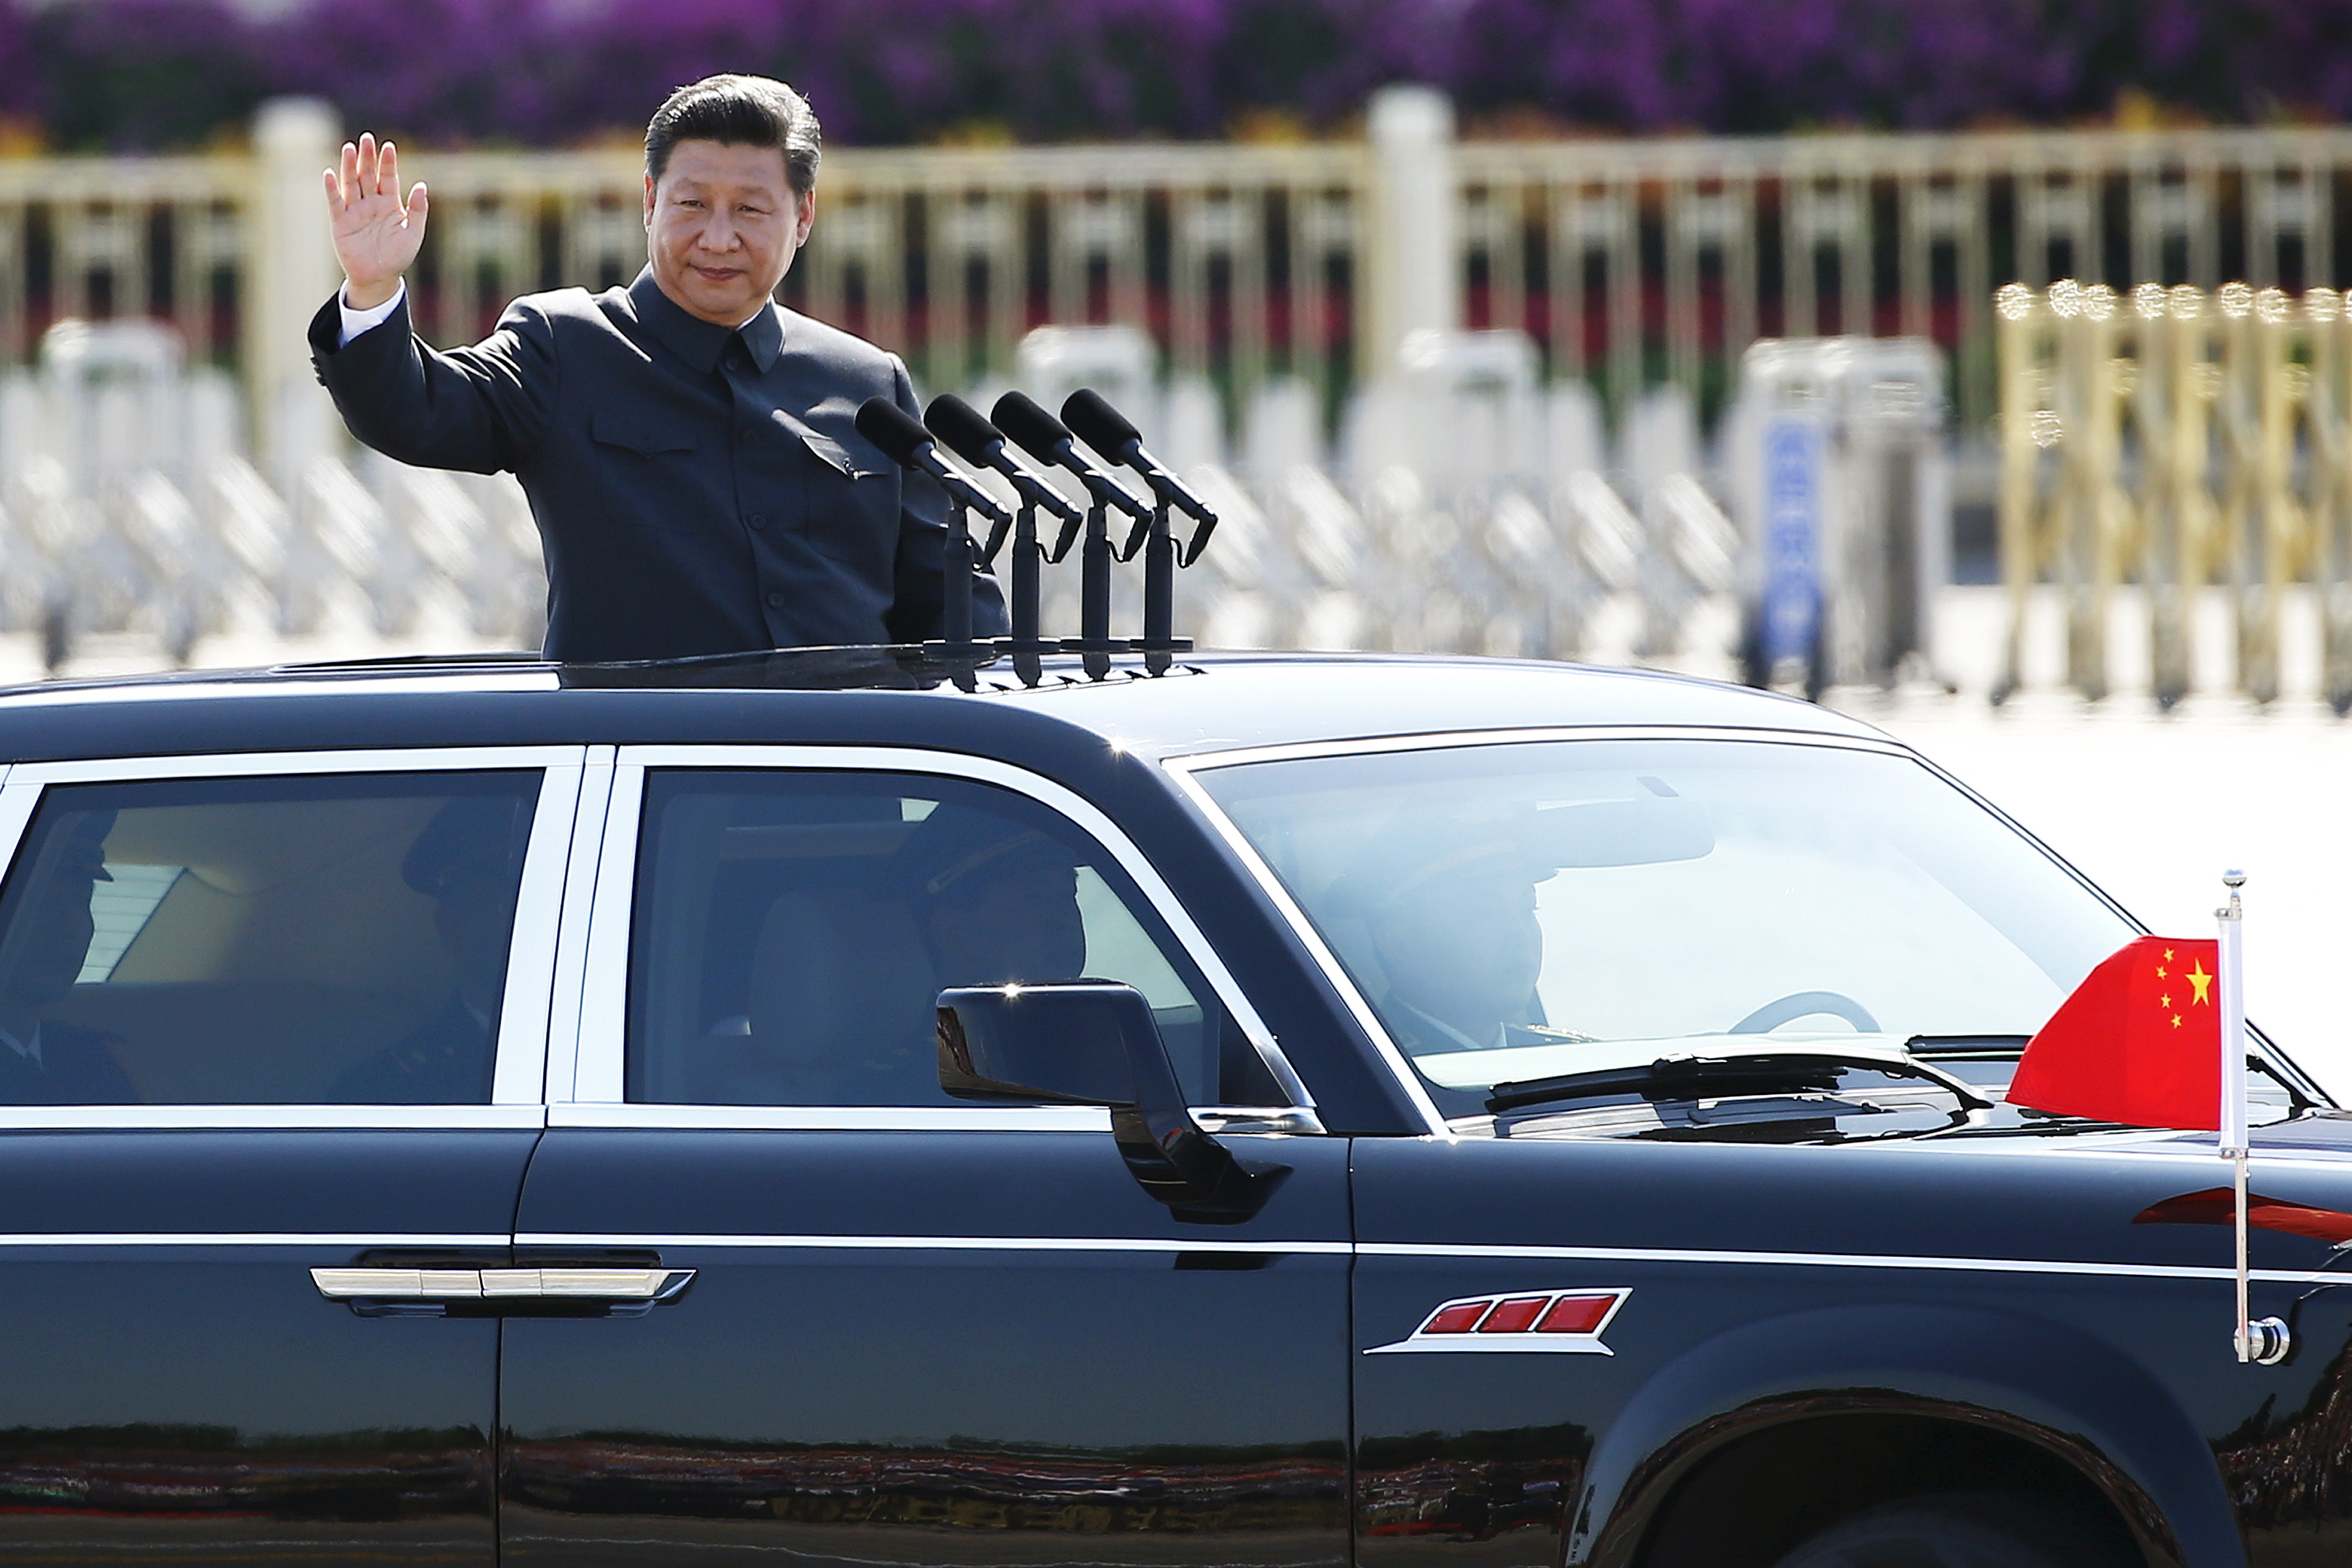 Chinese President Xi Jinping waves as he reviews the army, at the beginning of the military parade marking the 70th anniversary of the end of World War Two, in Beijing